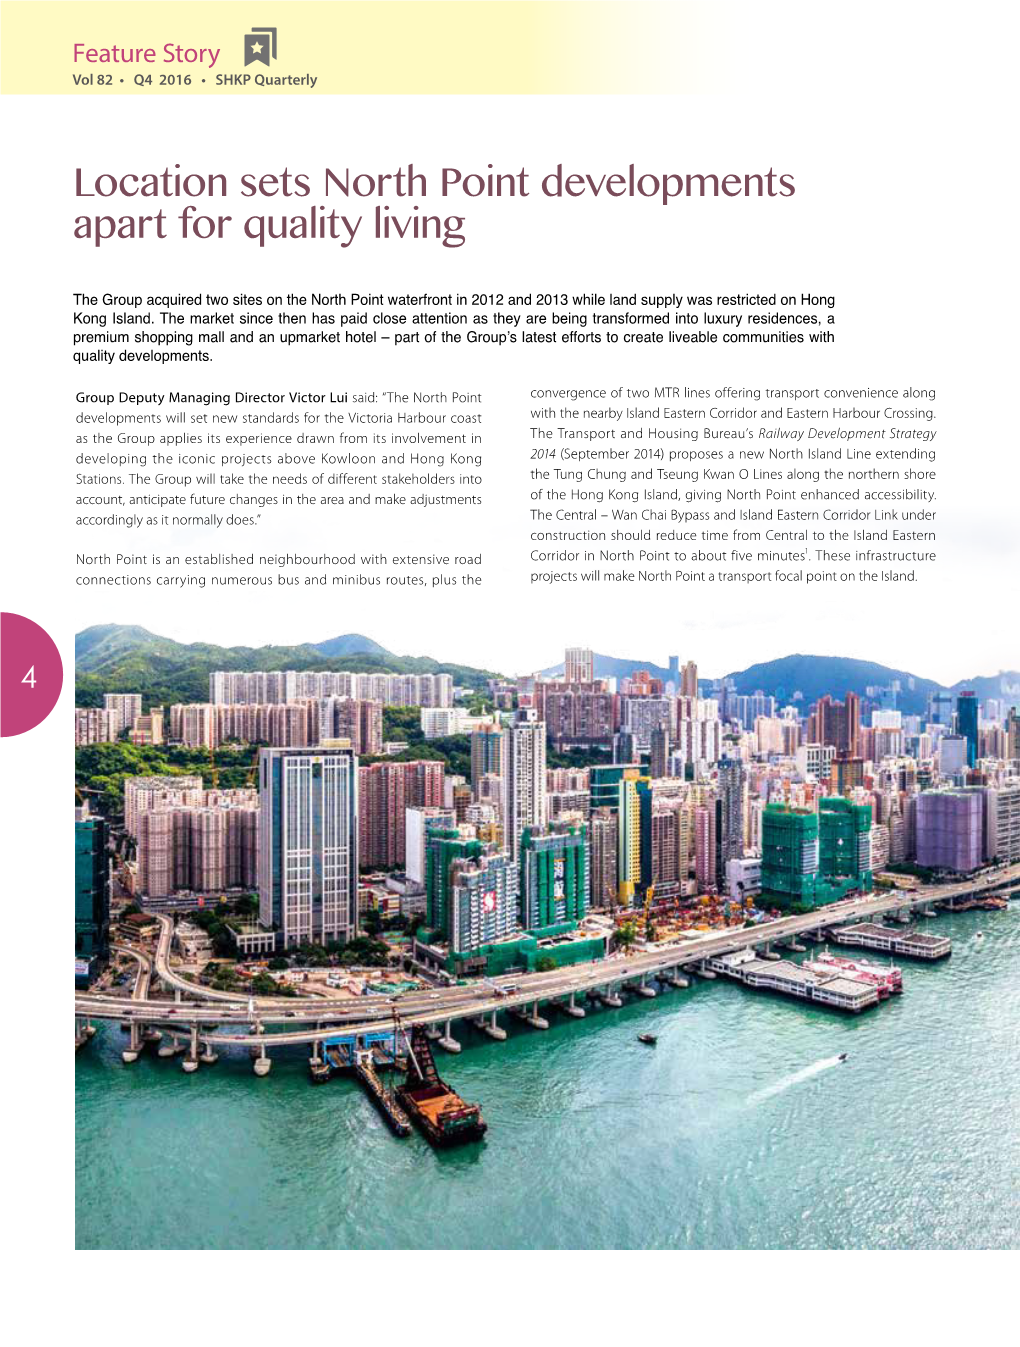 Location Sets North Point Developments Apart for Quality Living